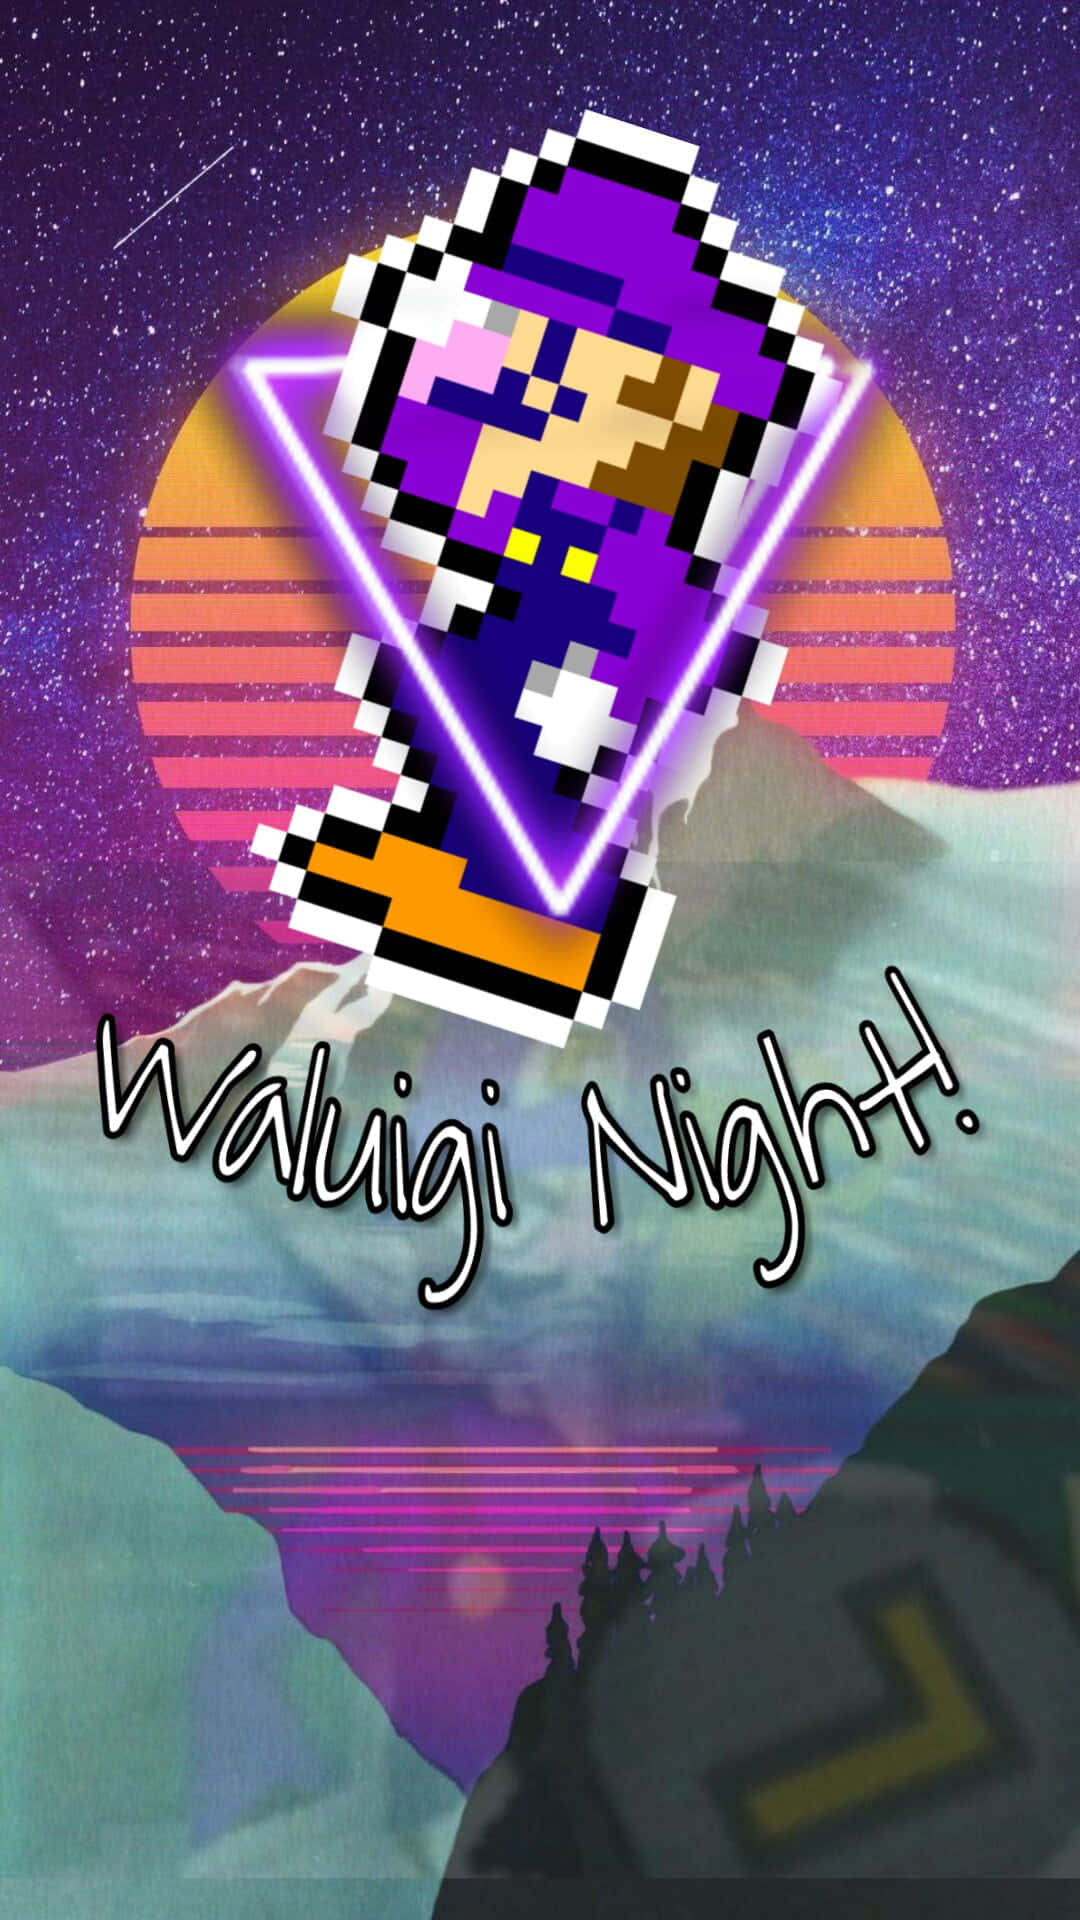 Waluigi Strikes A Pose In Vibrant Colors Background